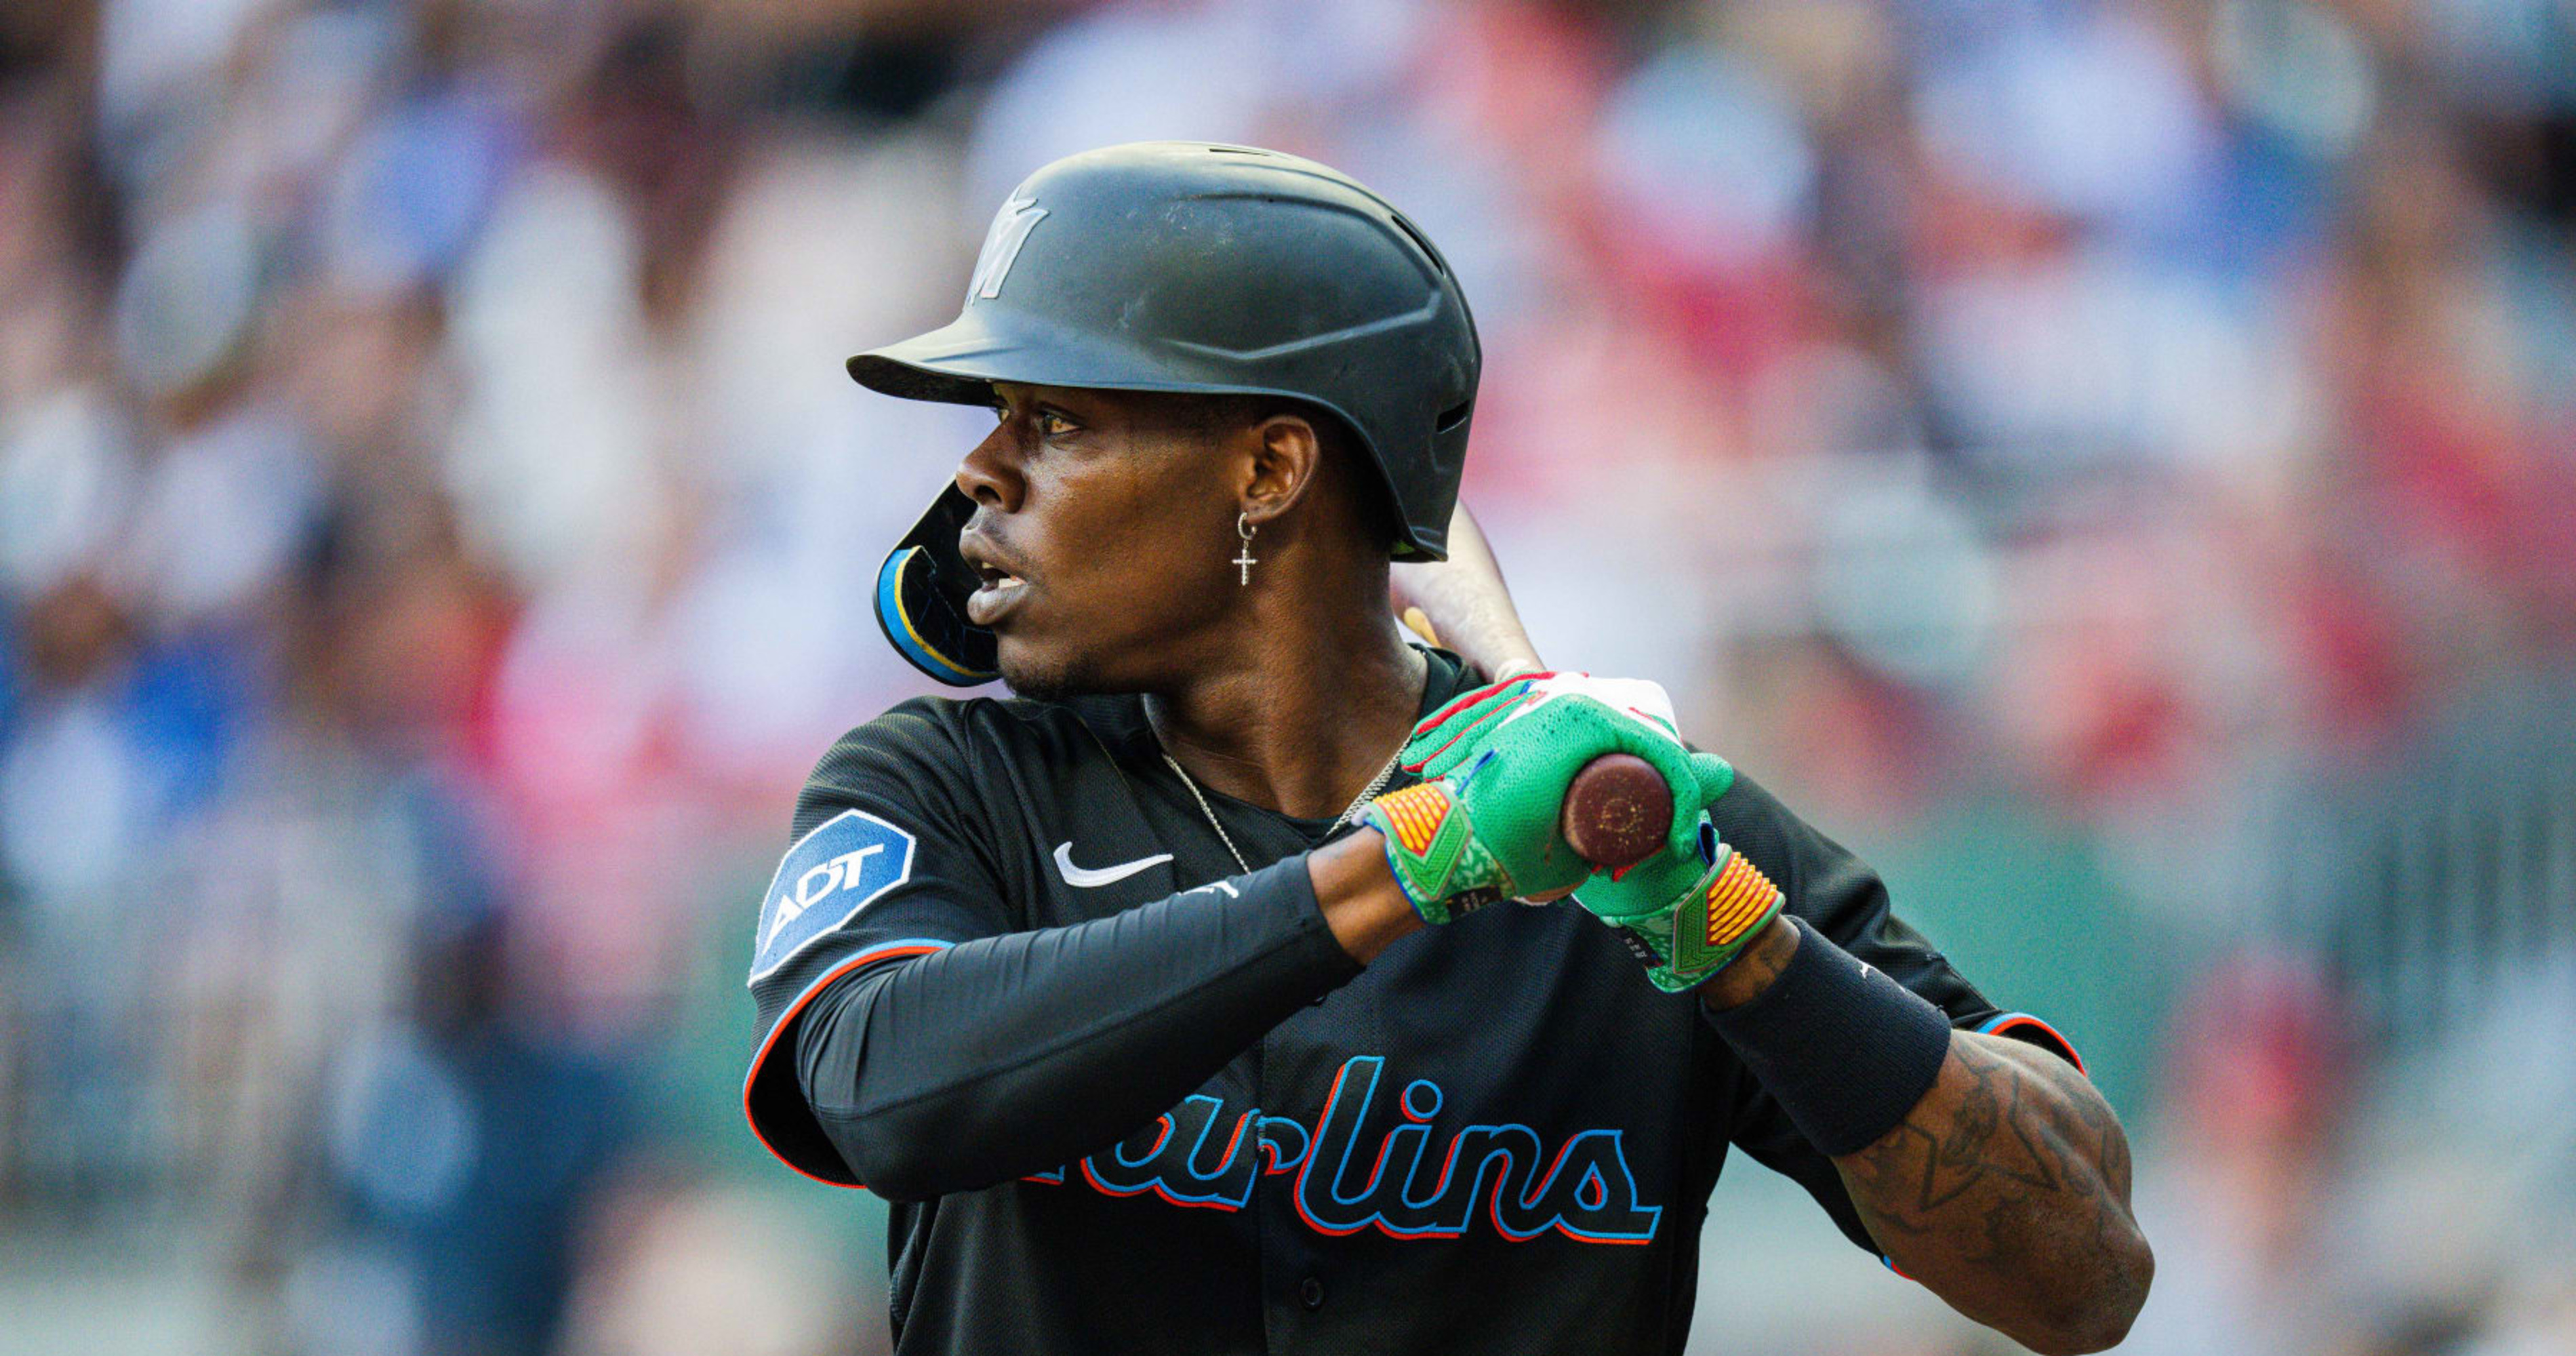 Jazz Chisholm Jr. #2 of the Miami Marlins in action against the